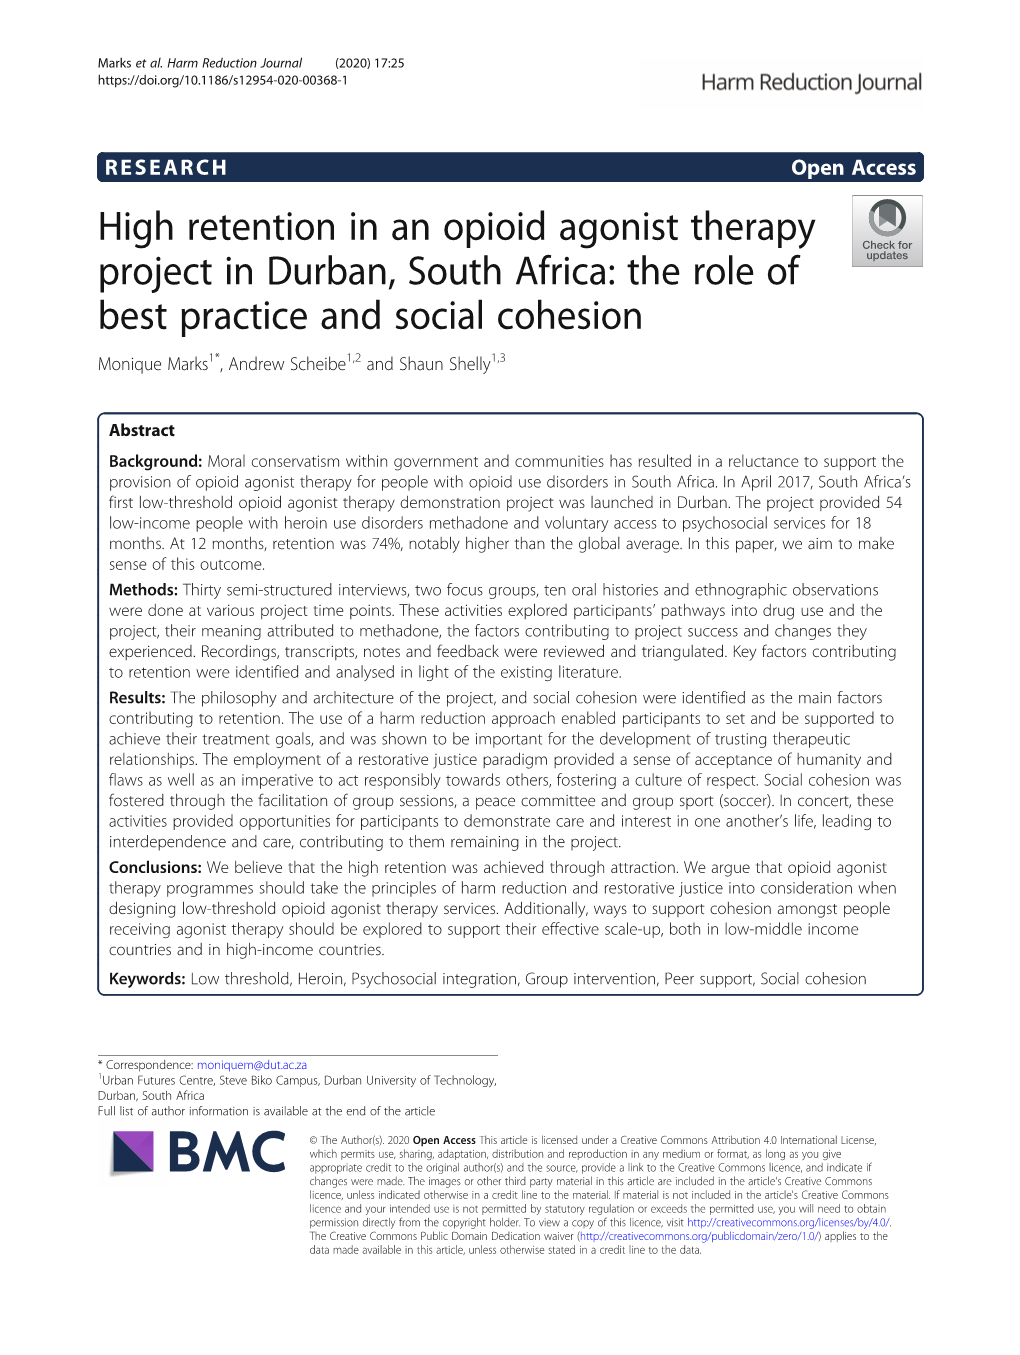 High Retention in an Opioid Agonist Therapy Project in Durban, South